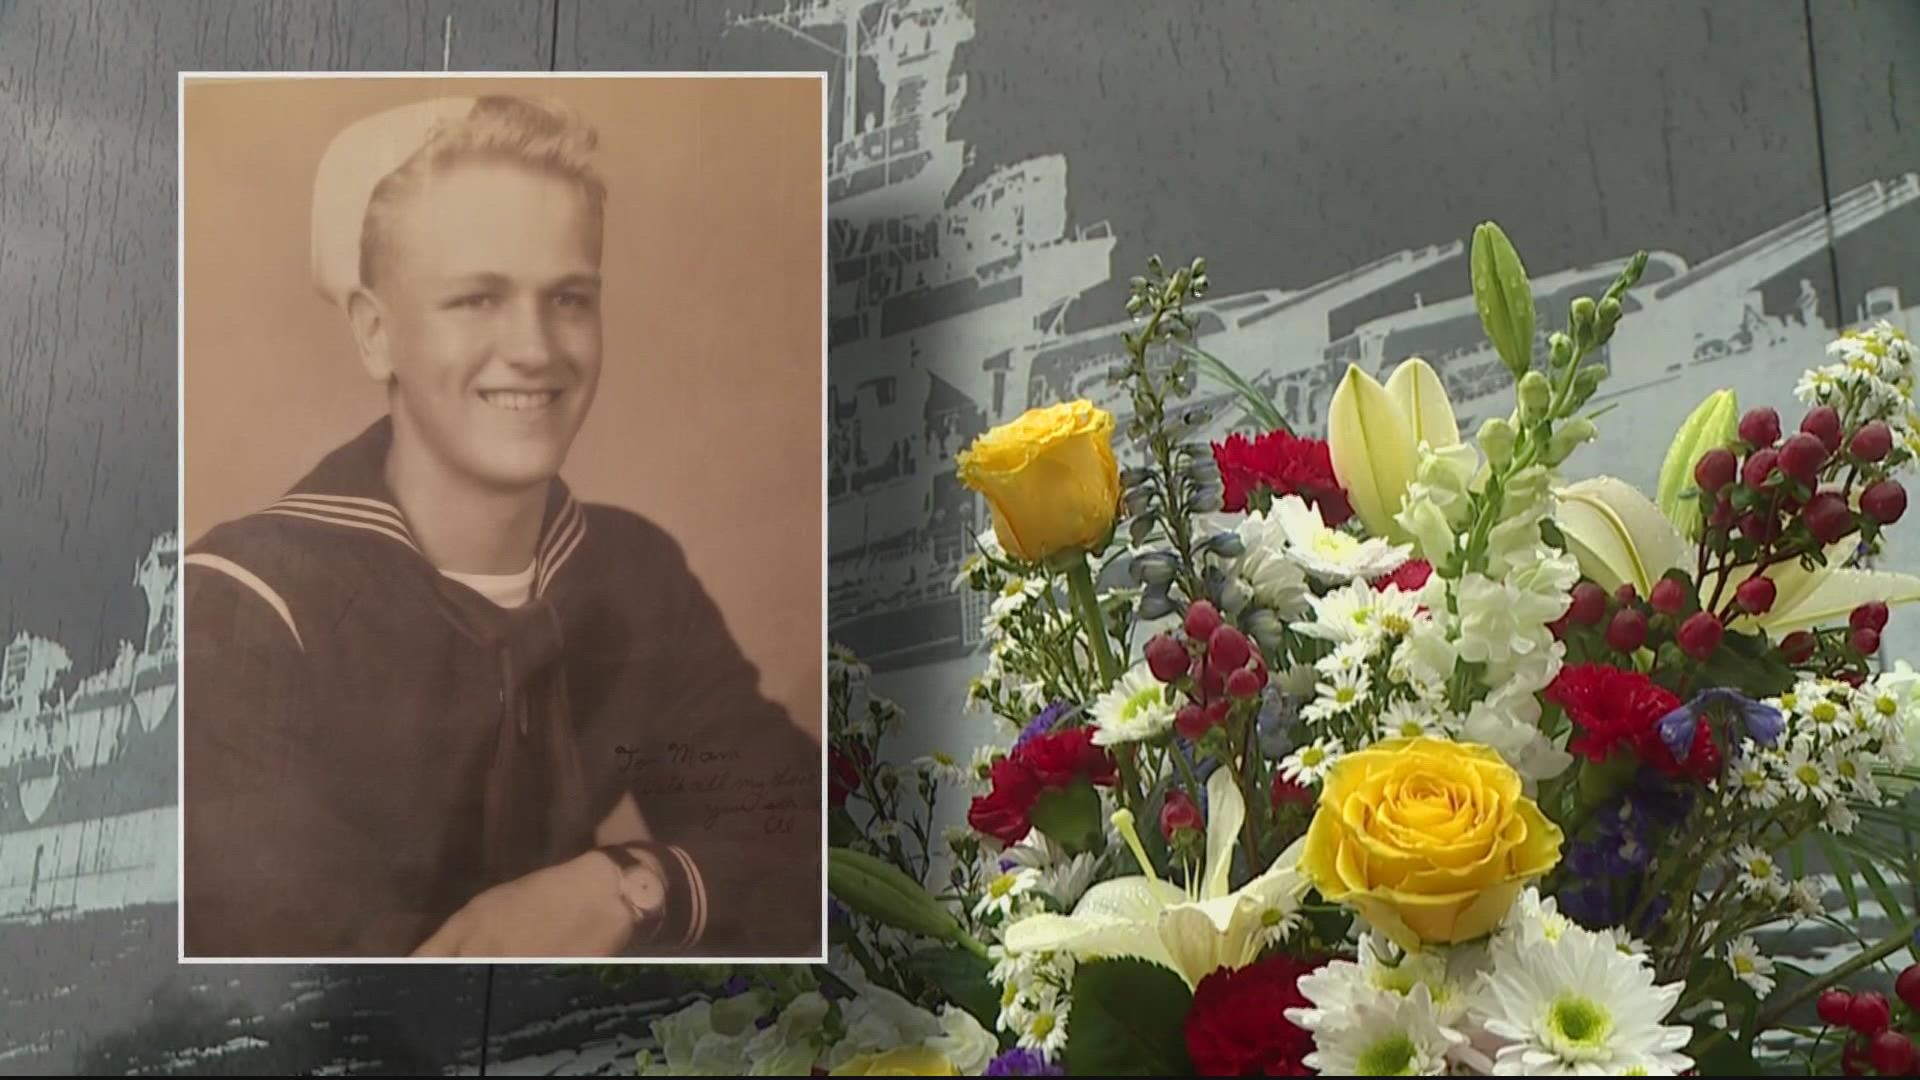 Son of sailor who died on USS Indianapolis carries on legacy